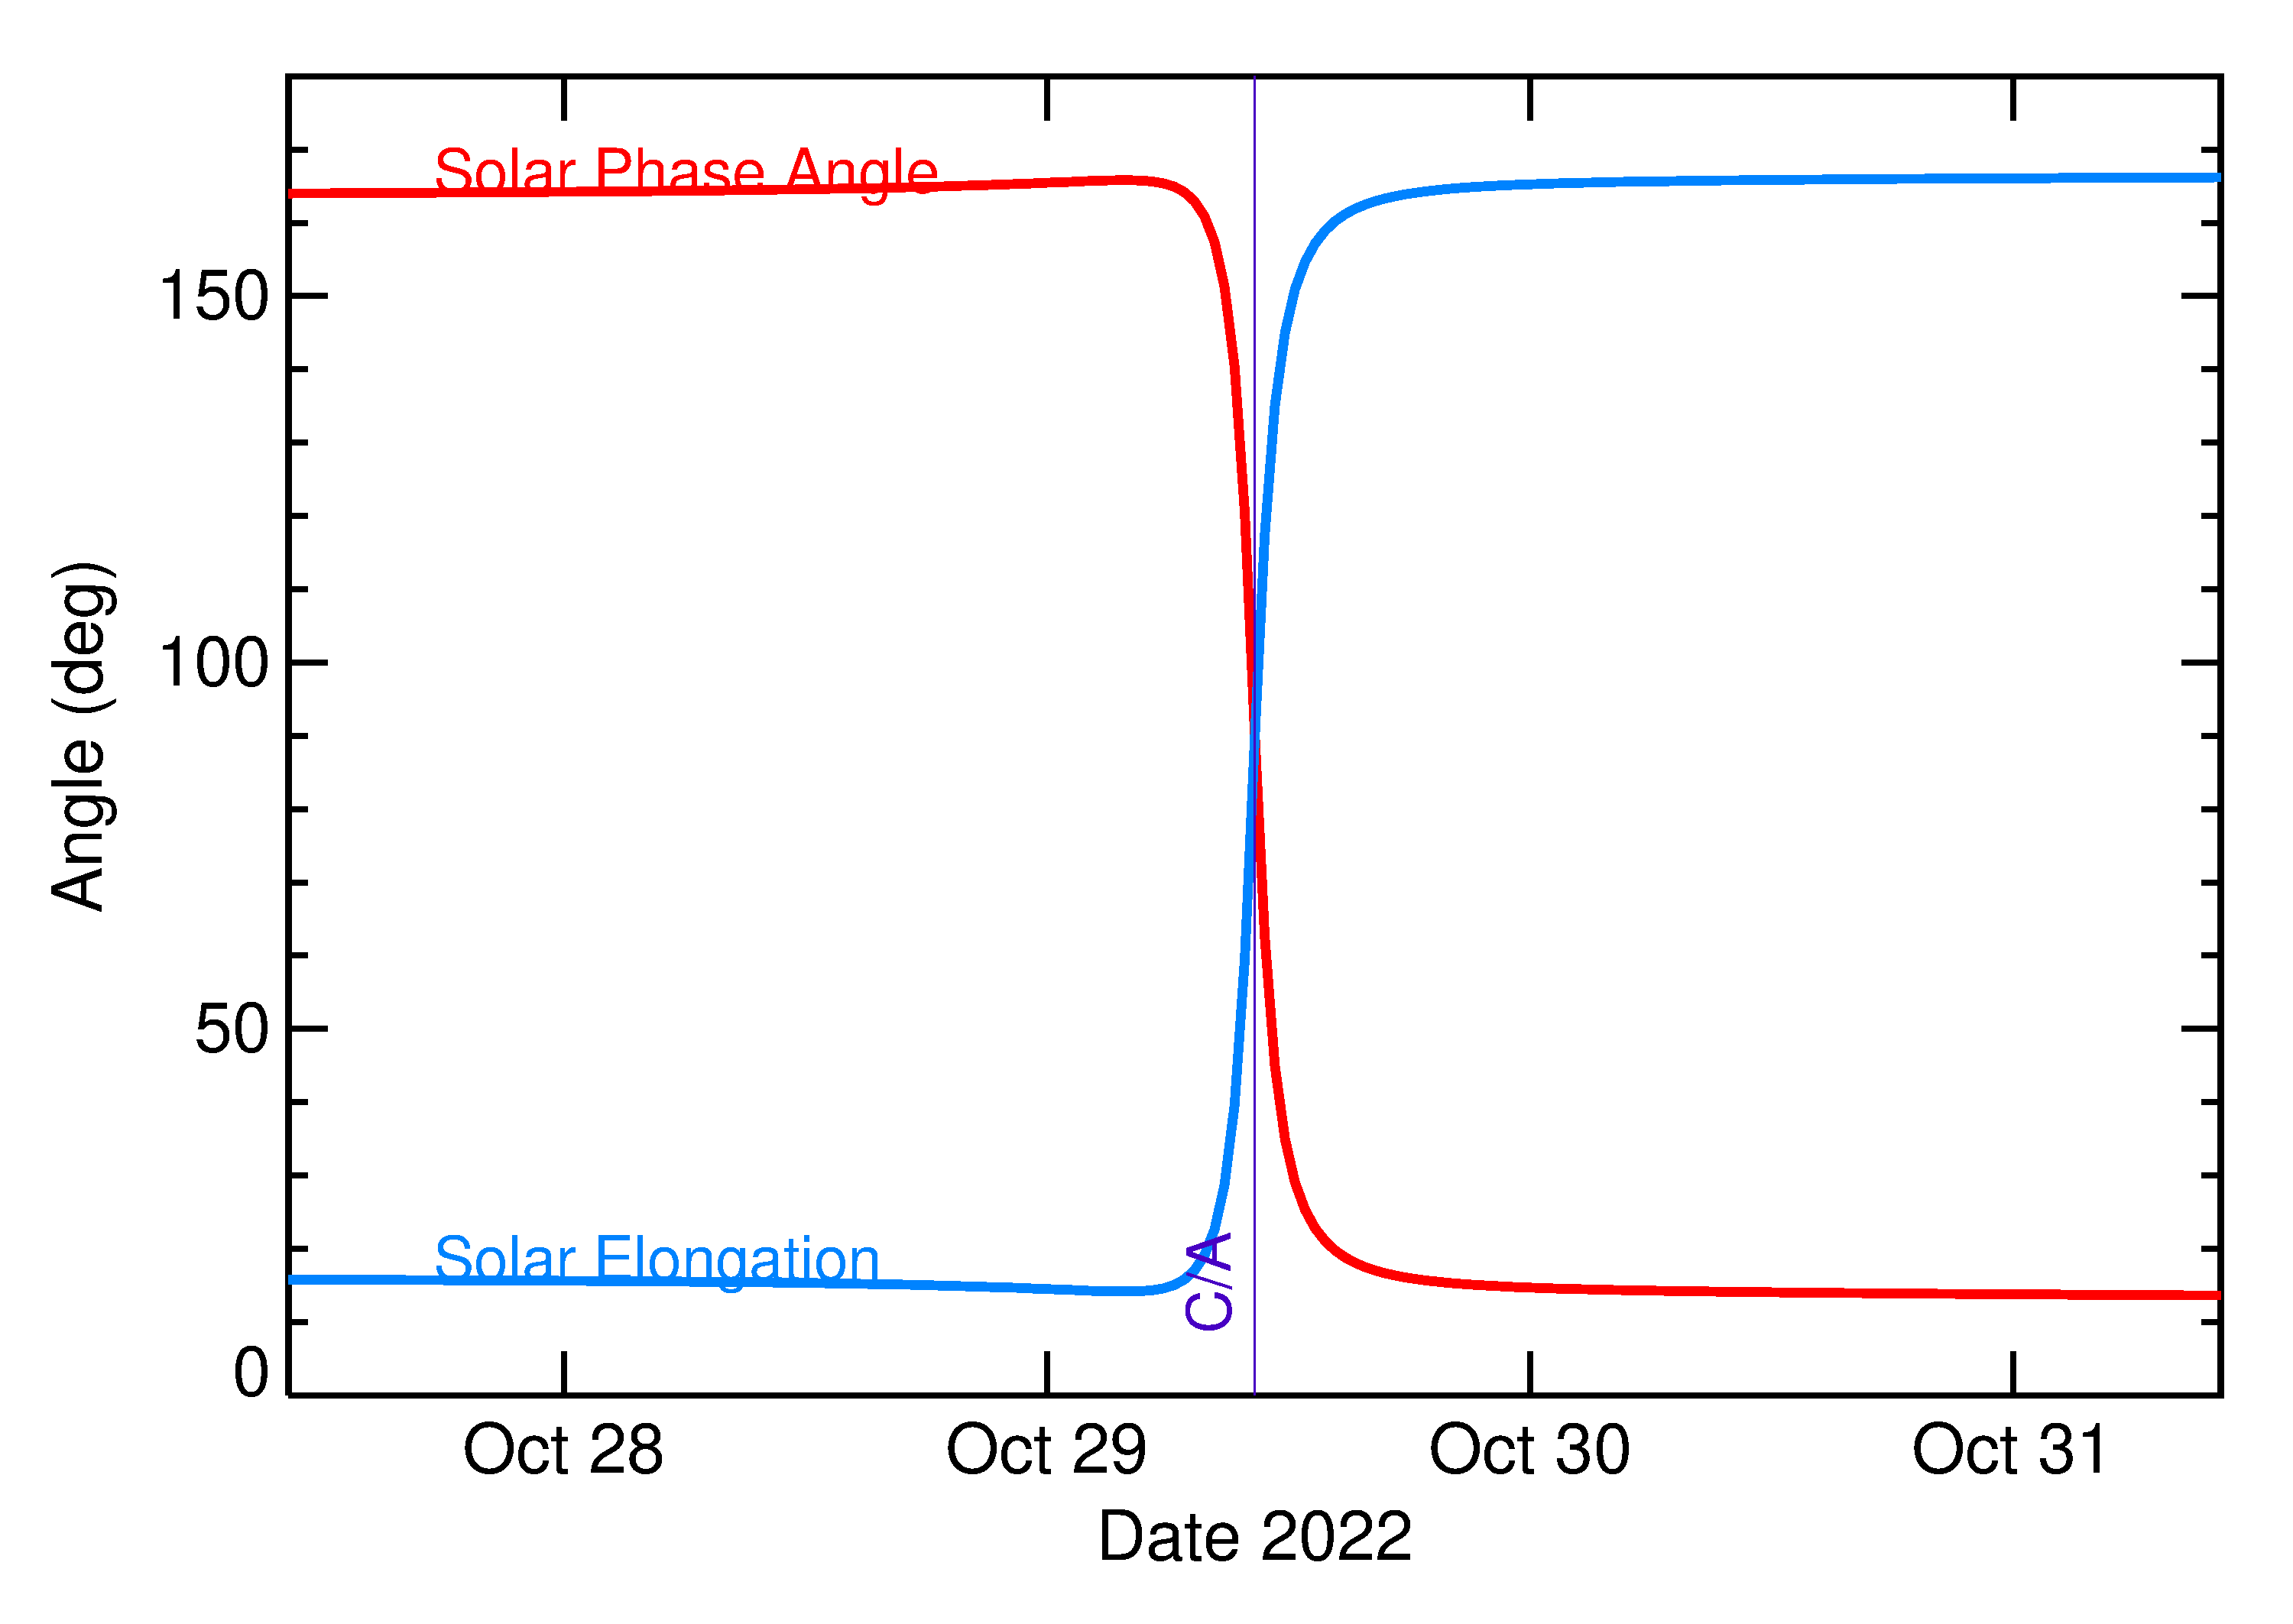 Solar Elongation and Solar Phase Angle of 2022 UW16 in the days around closest approach